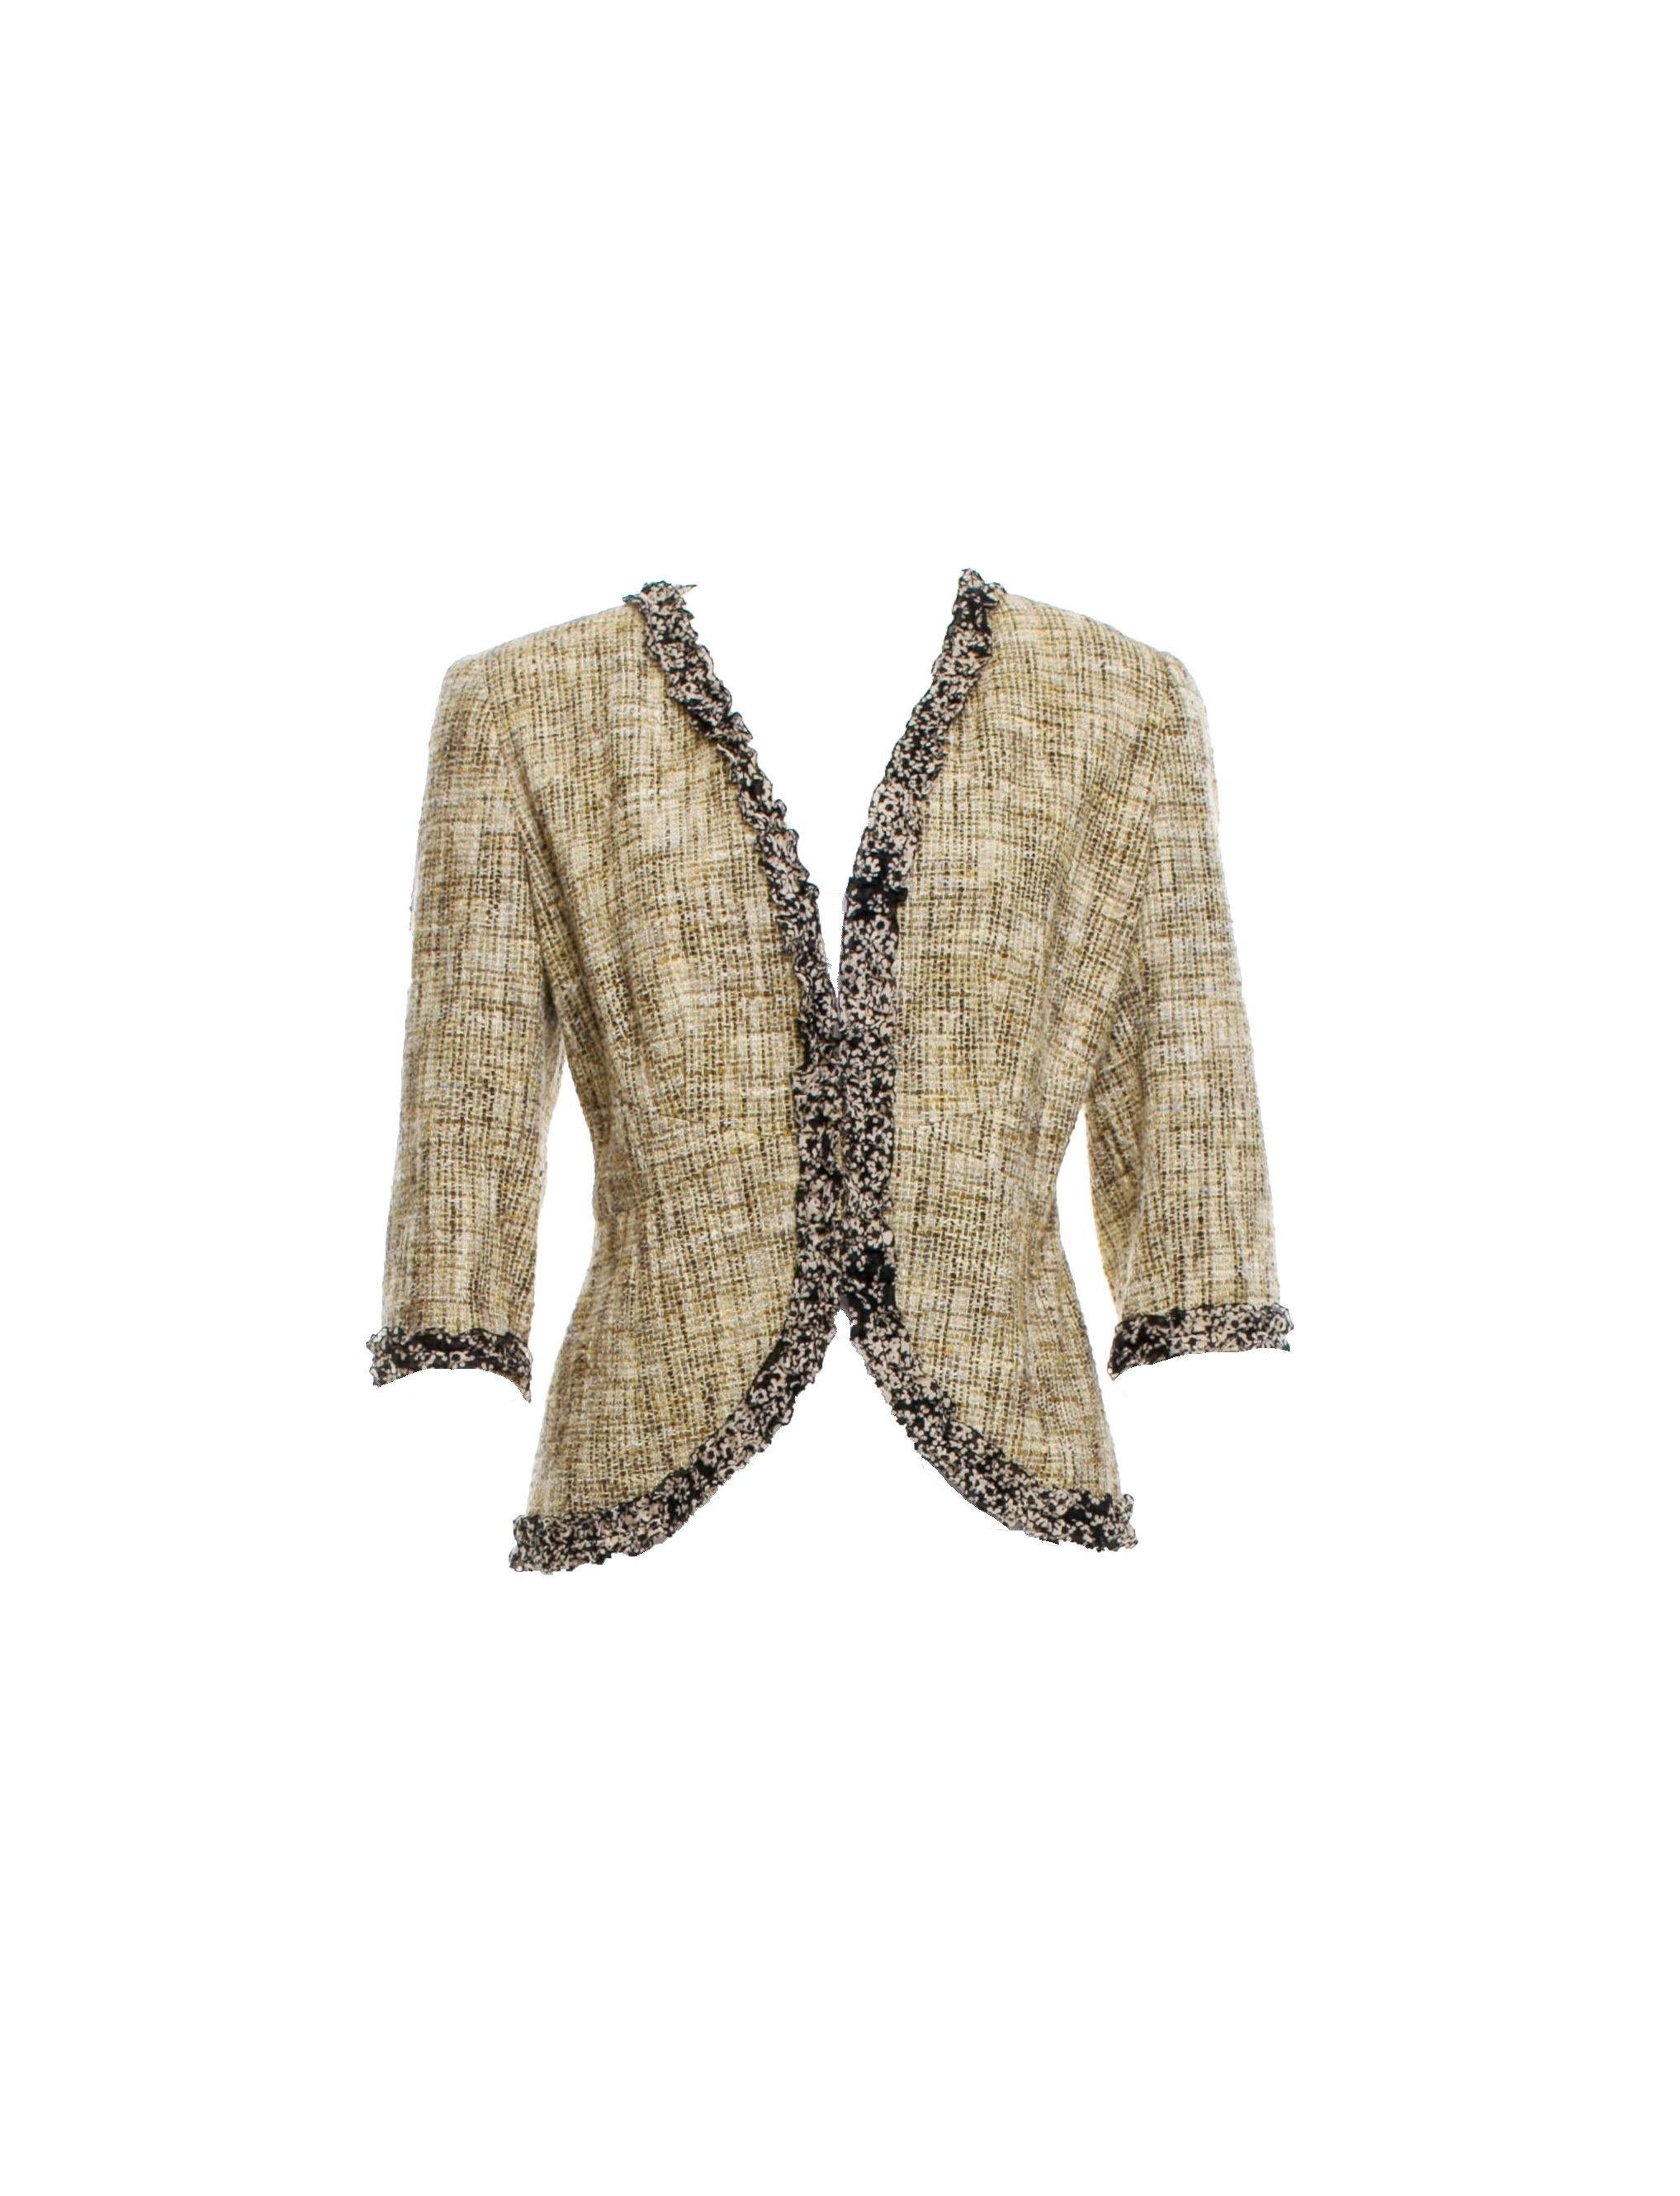 Chanel signature jacket
A timeless classic that should be in every woman's wardrobe
Finest tweed fabric exclusively produced by Maison Lesage for Chanel
Beautiful pastel colors - this jacket is so versatile and fits to all
Cropped sleeves
Fully